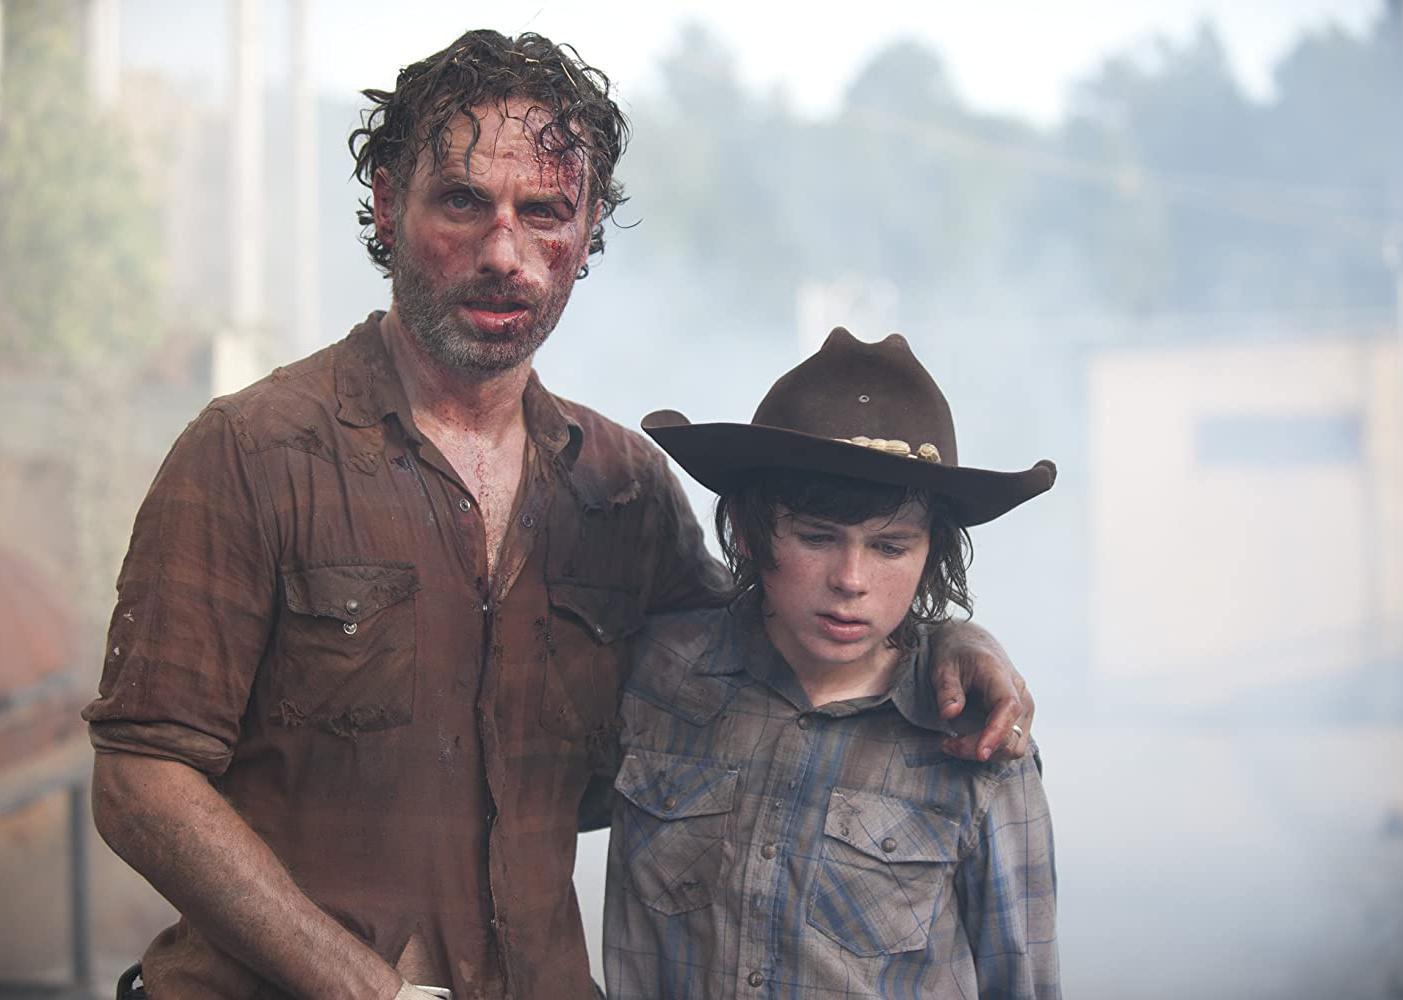 Andrew Lincoln, looking very beat up, holding onto a boy wearing a cowboy hat.